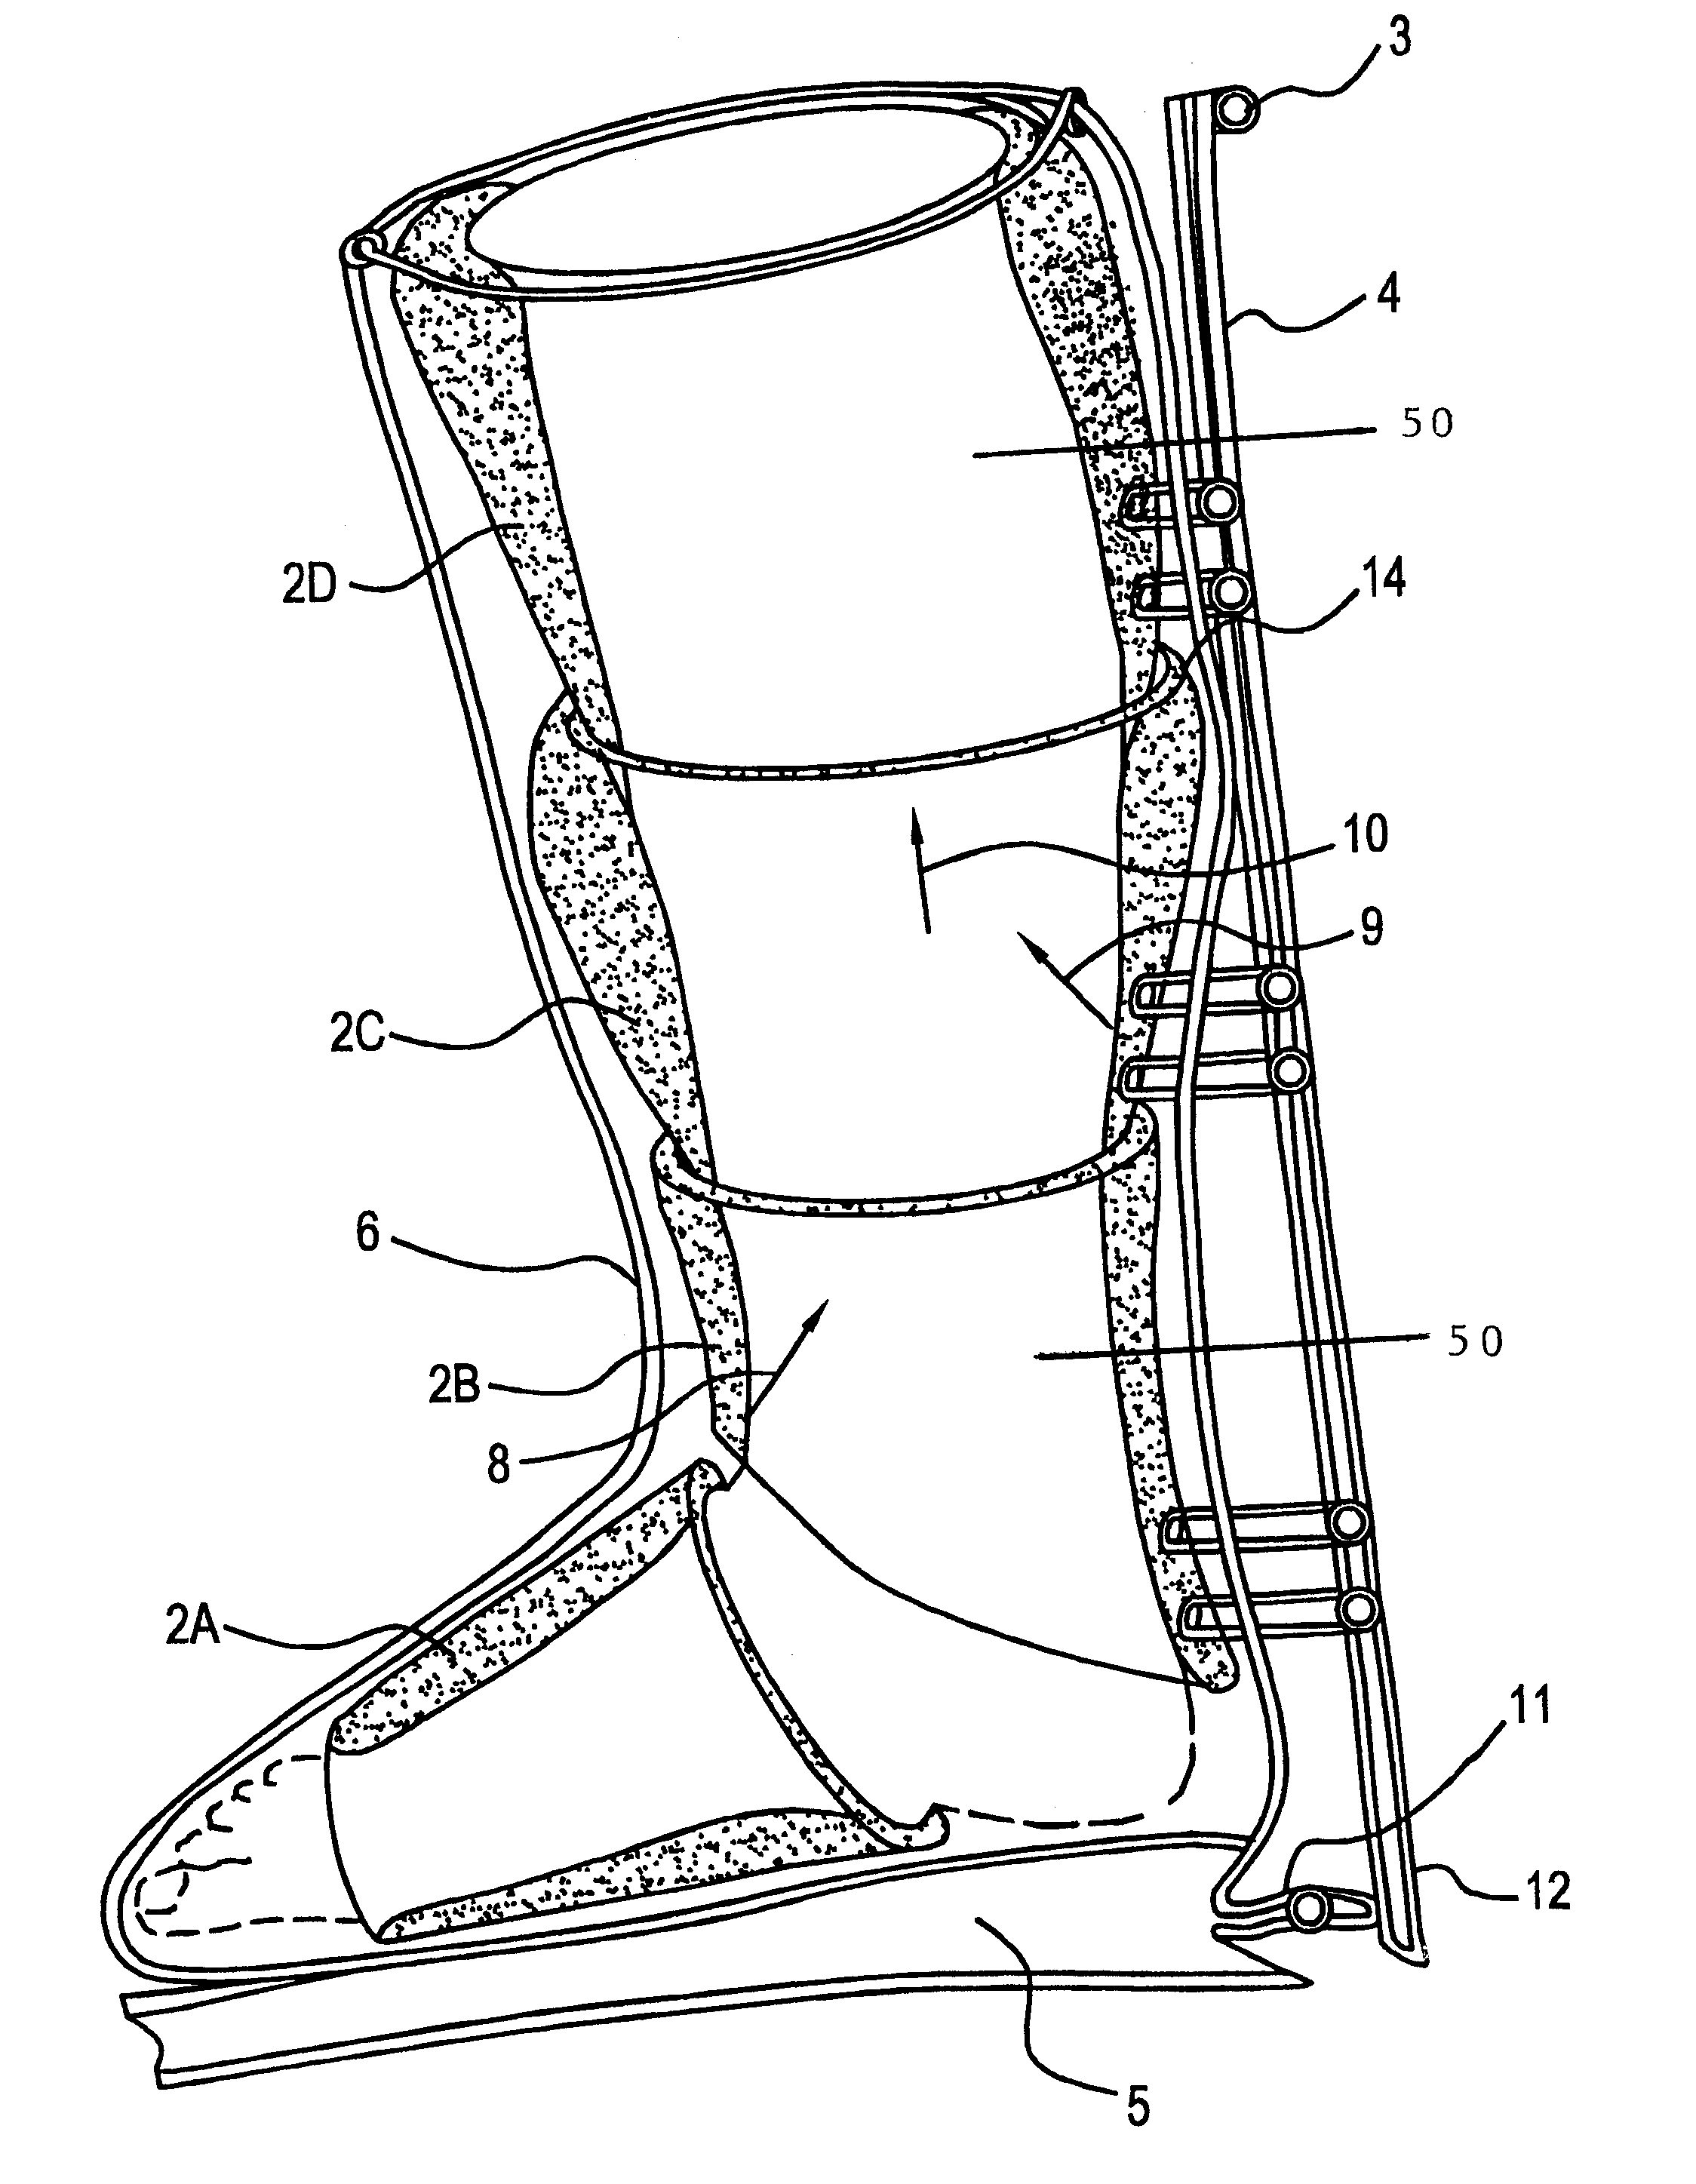 Self-powered compression devices and methods for promoting circulation and therapeutic compression